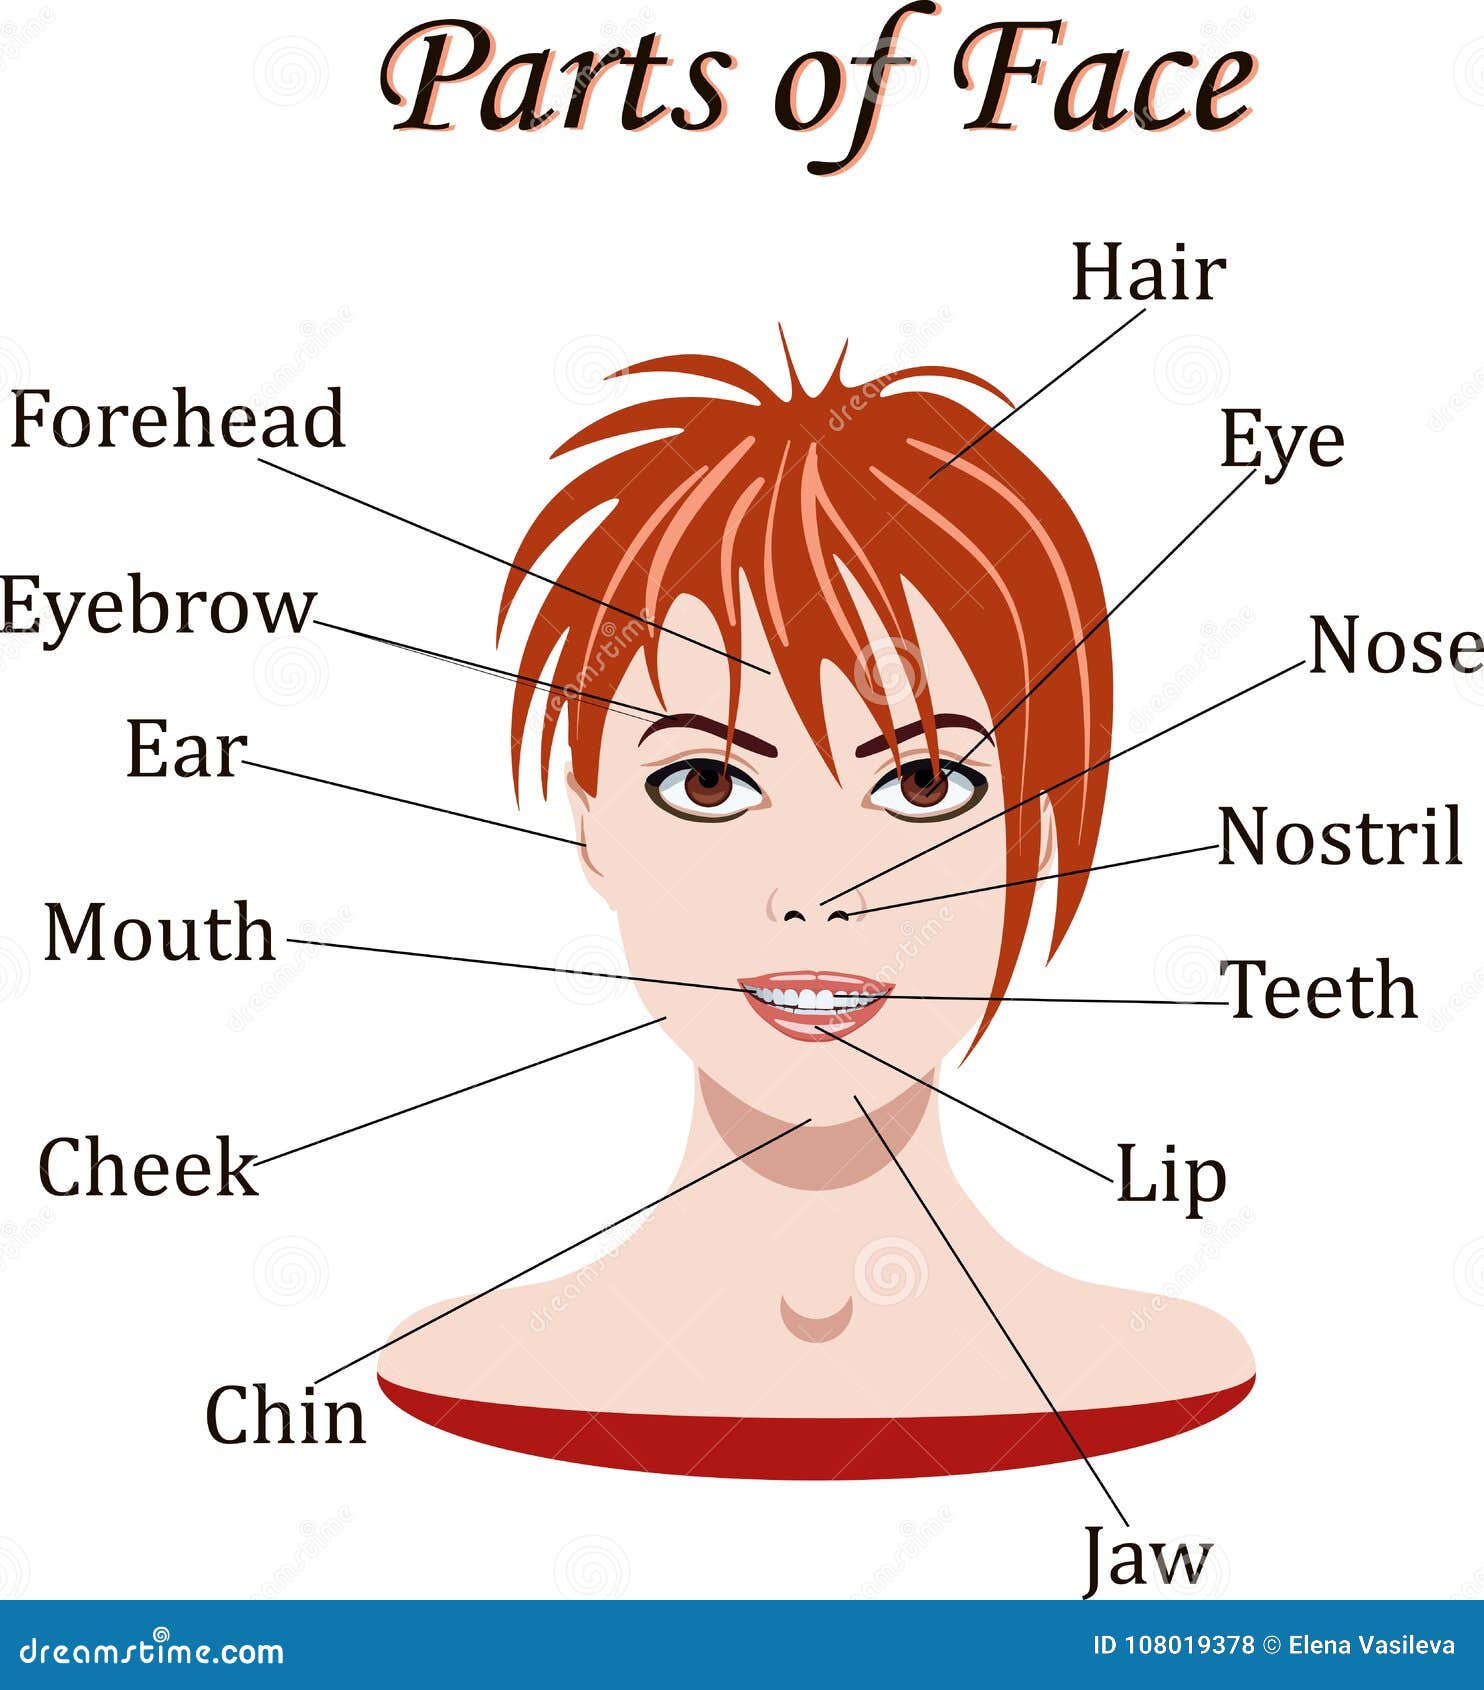 vocabulary-of-face-parts-for-lessons-vector-illustration-stock-vector-illustration-of-eyebrow